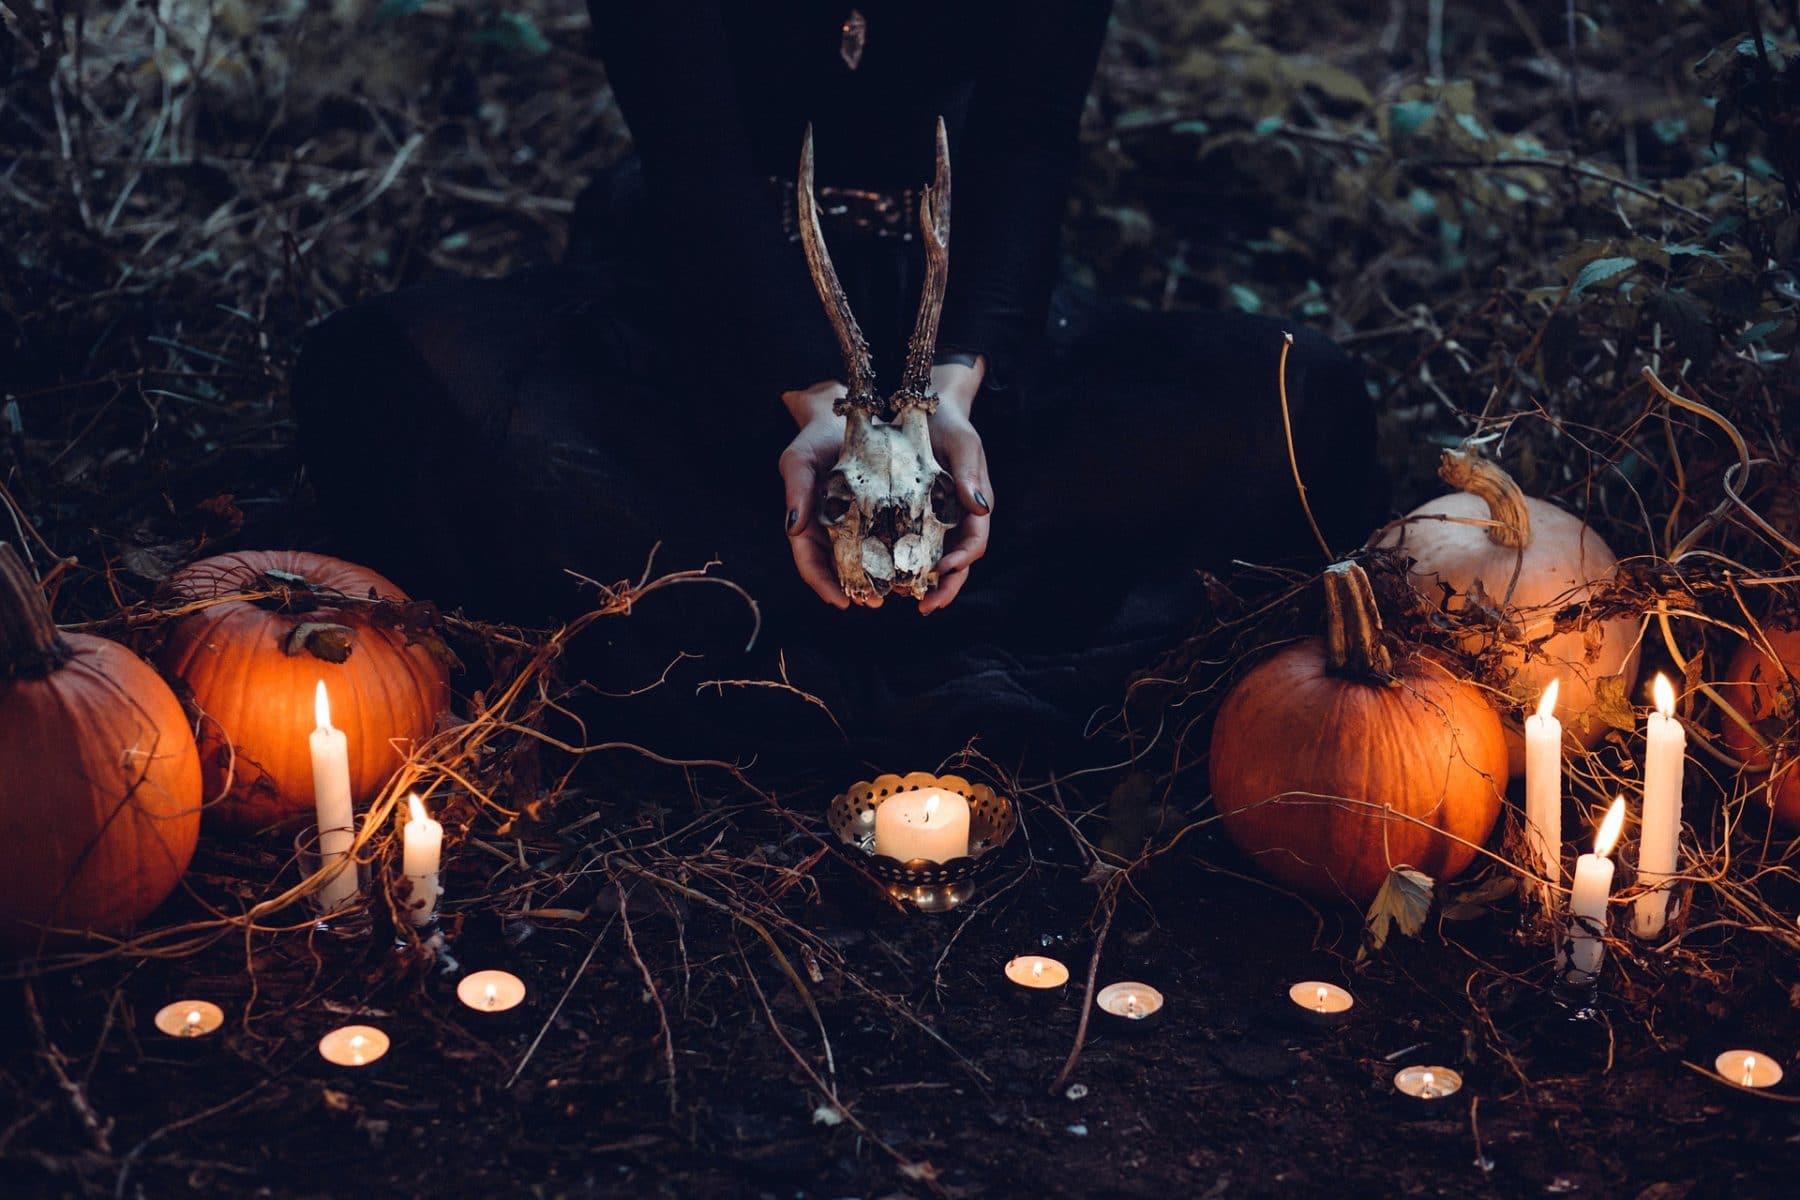 image of woman surrounded by pumpkins and candles, holding a skull